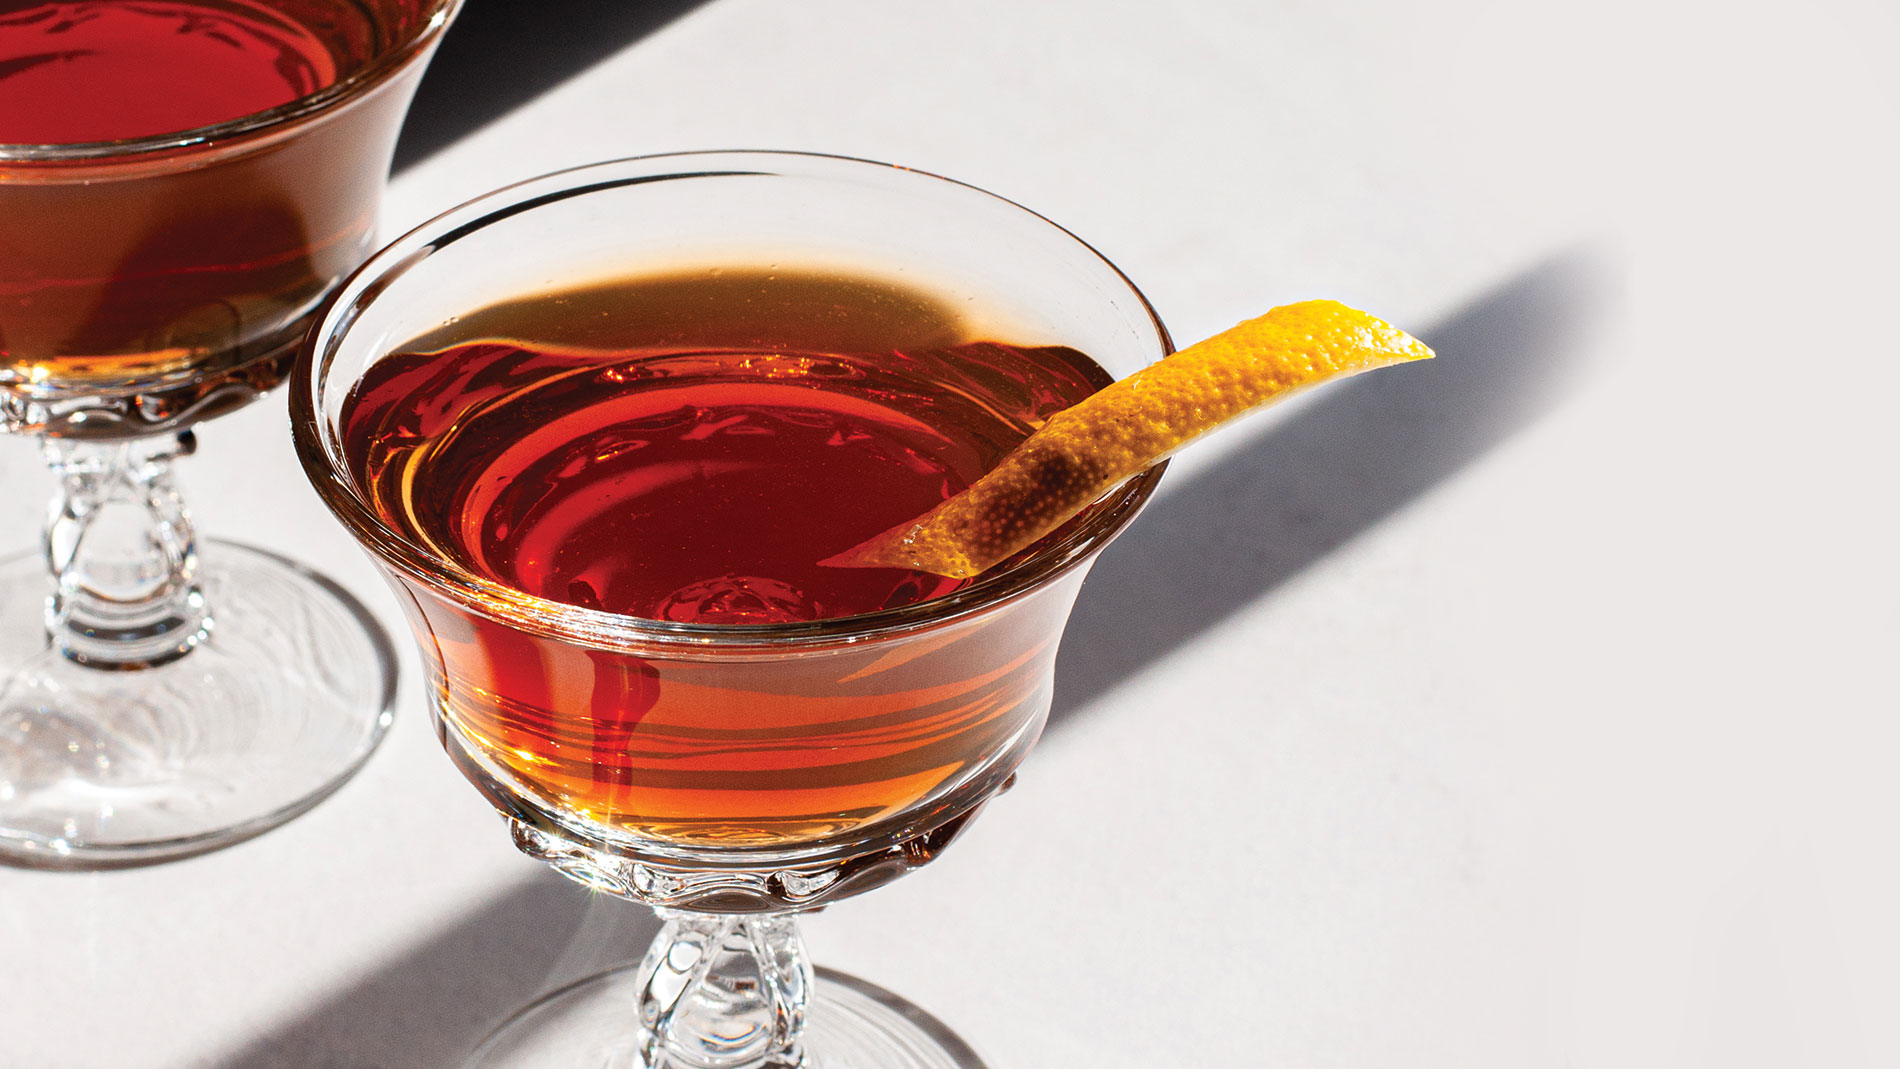 Drink this Brooklyn cocktail